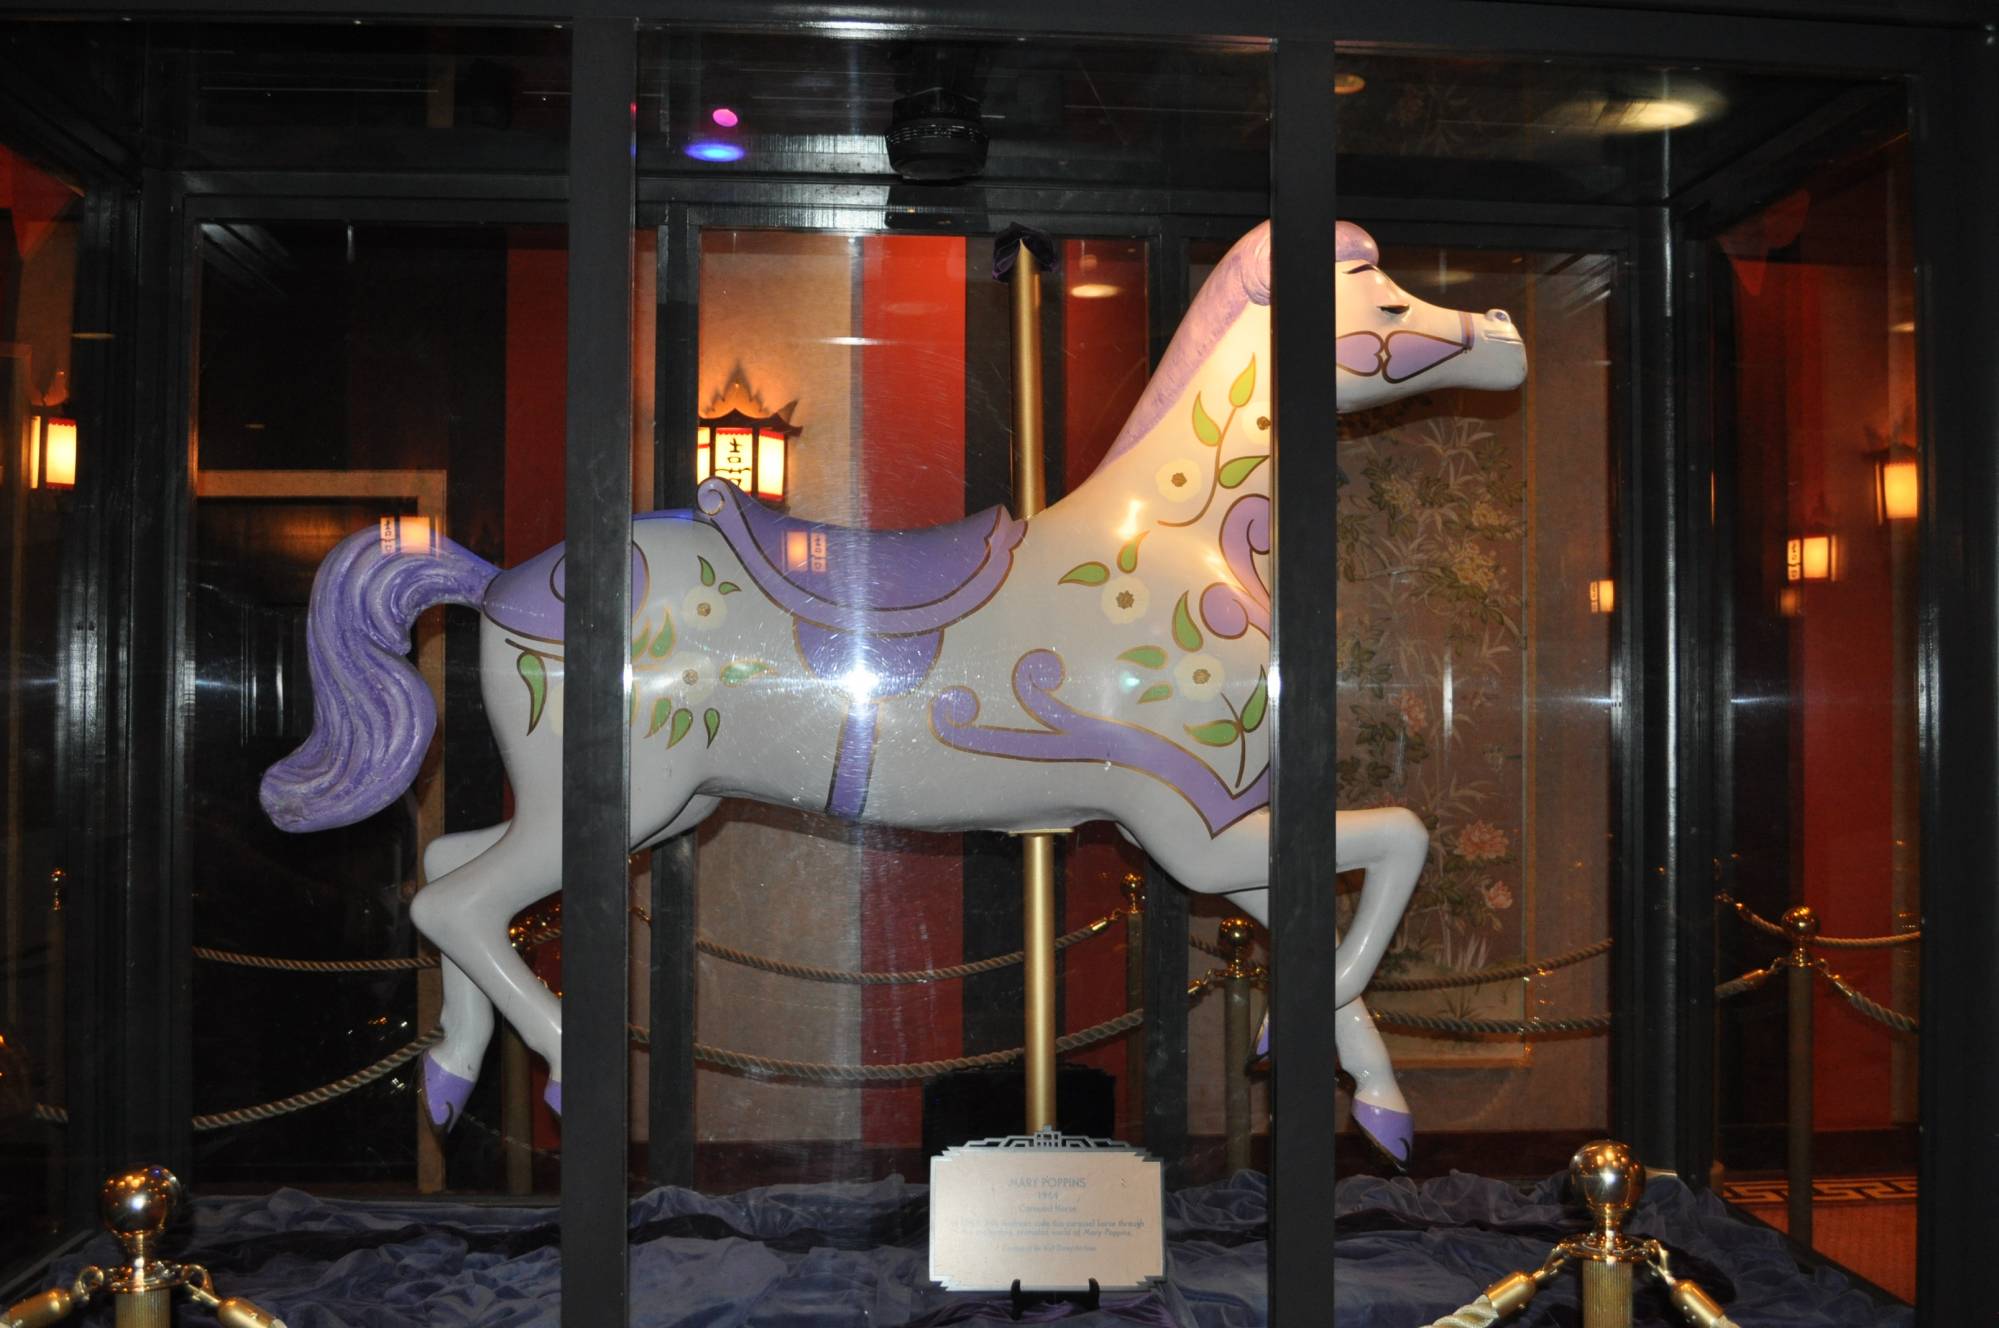 Carousel horse from Mary Poppins